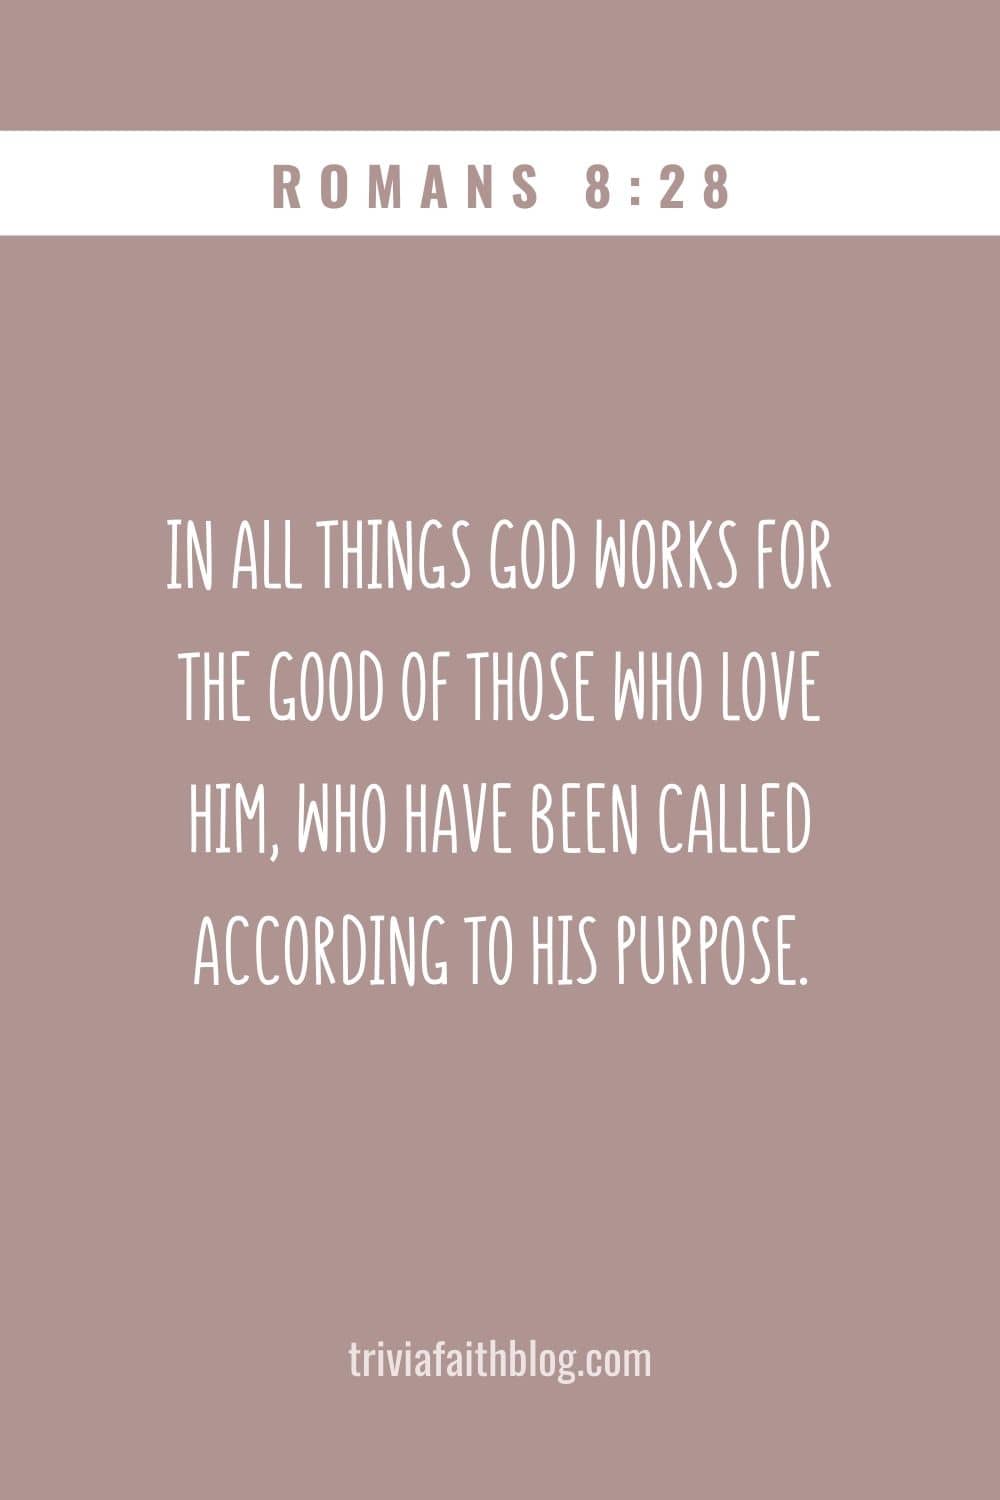 In all things God works for the good of those who love him, who have been called according to his purpose